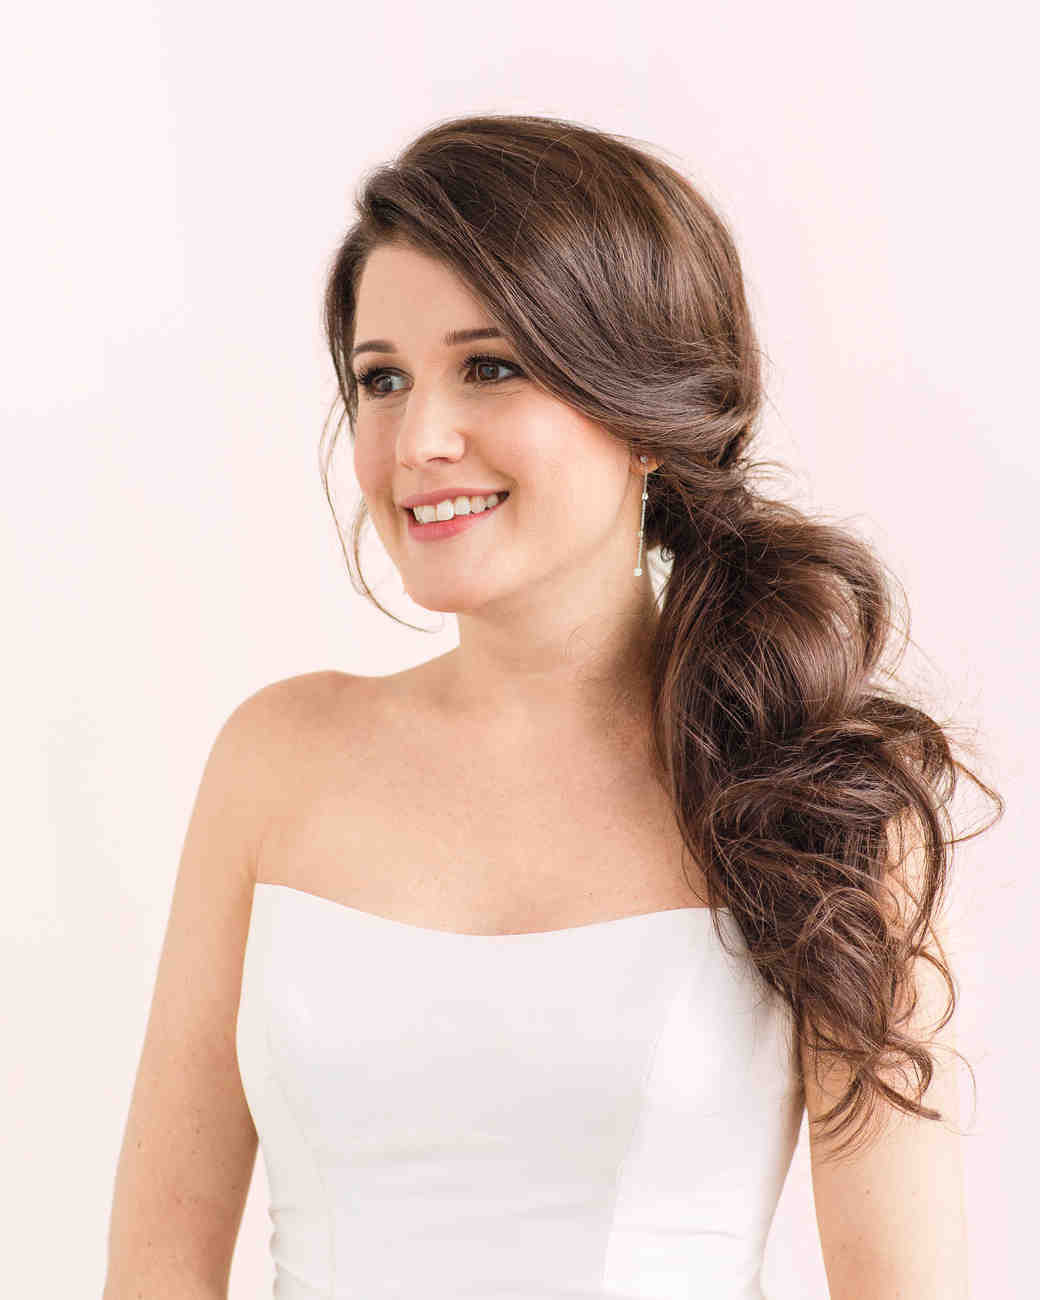 Side Hairstyles For Bridesmaids
 We Asked 3 Brides to Be to Try 2 Wedding Day Beauty Ideas